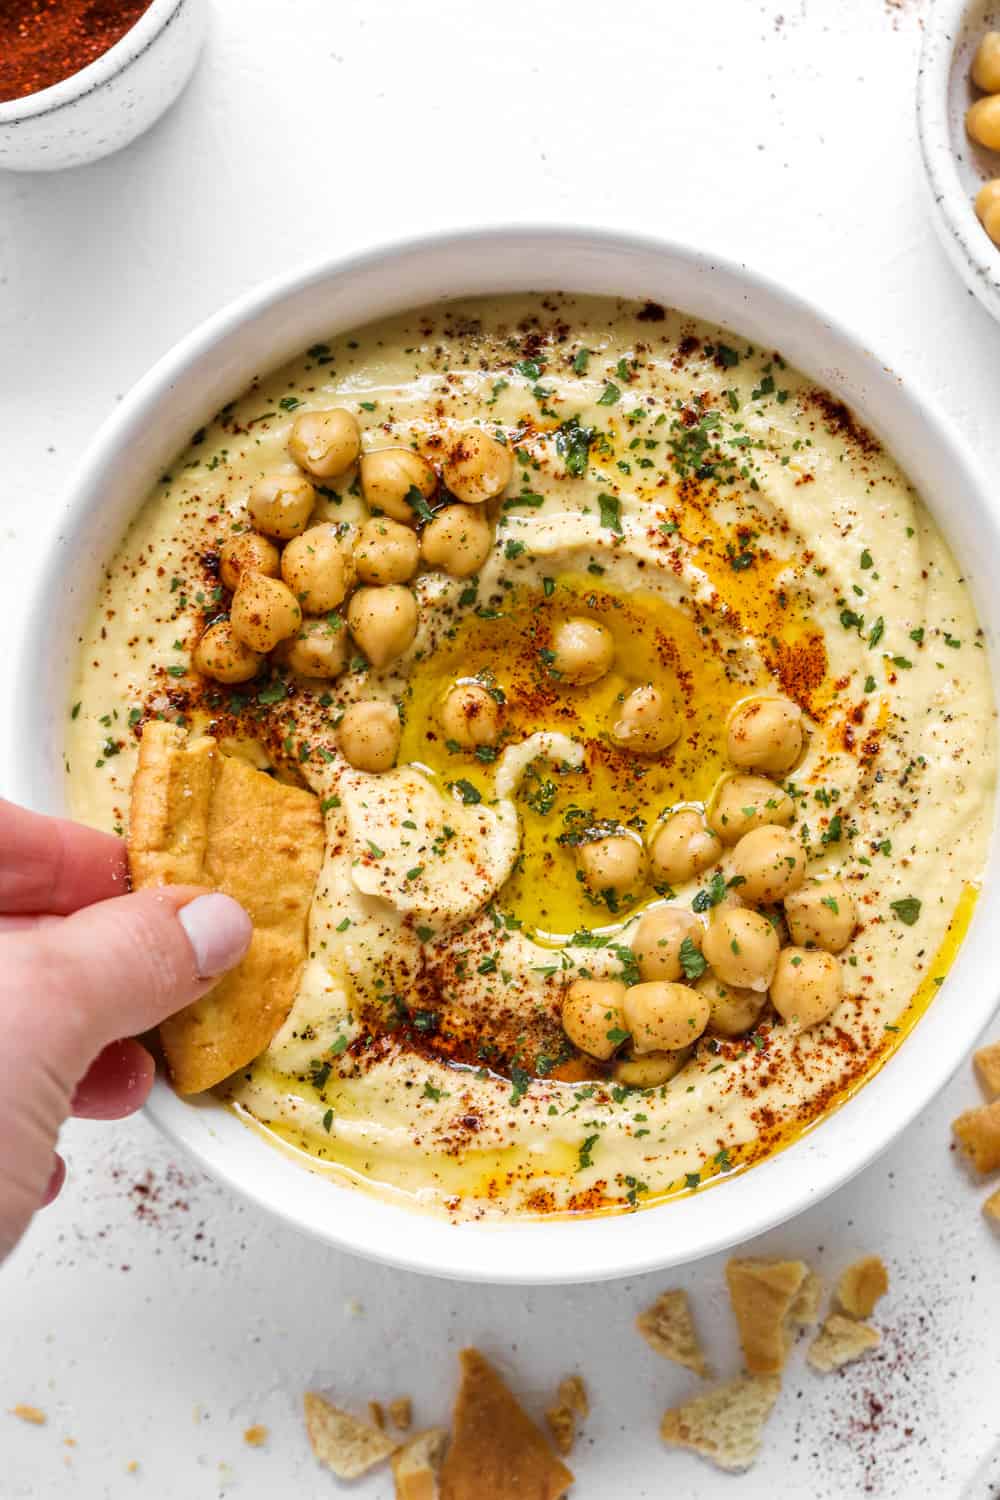 Best Hummus Recipe - Ready in 5 minutes - Pinch Me Good